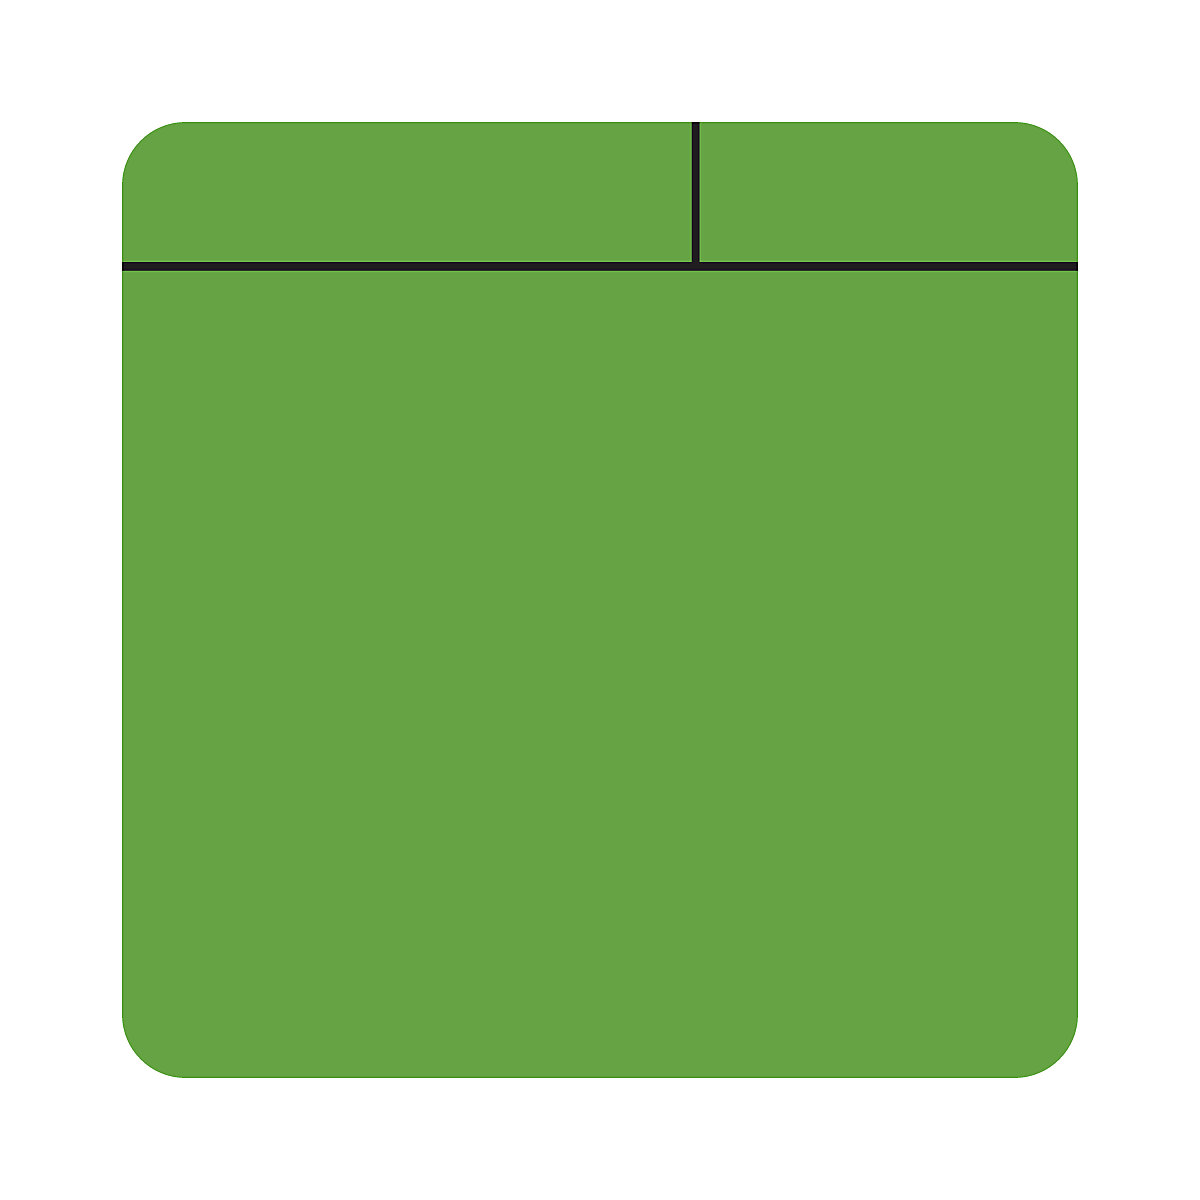 Post-it notes, magnetic, LxW 100 x 100 mm, pack of 10, green-8